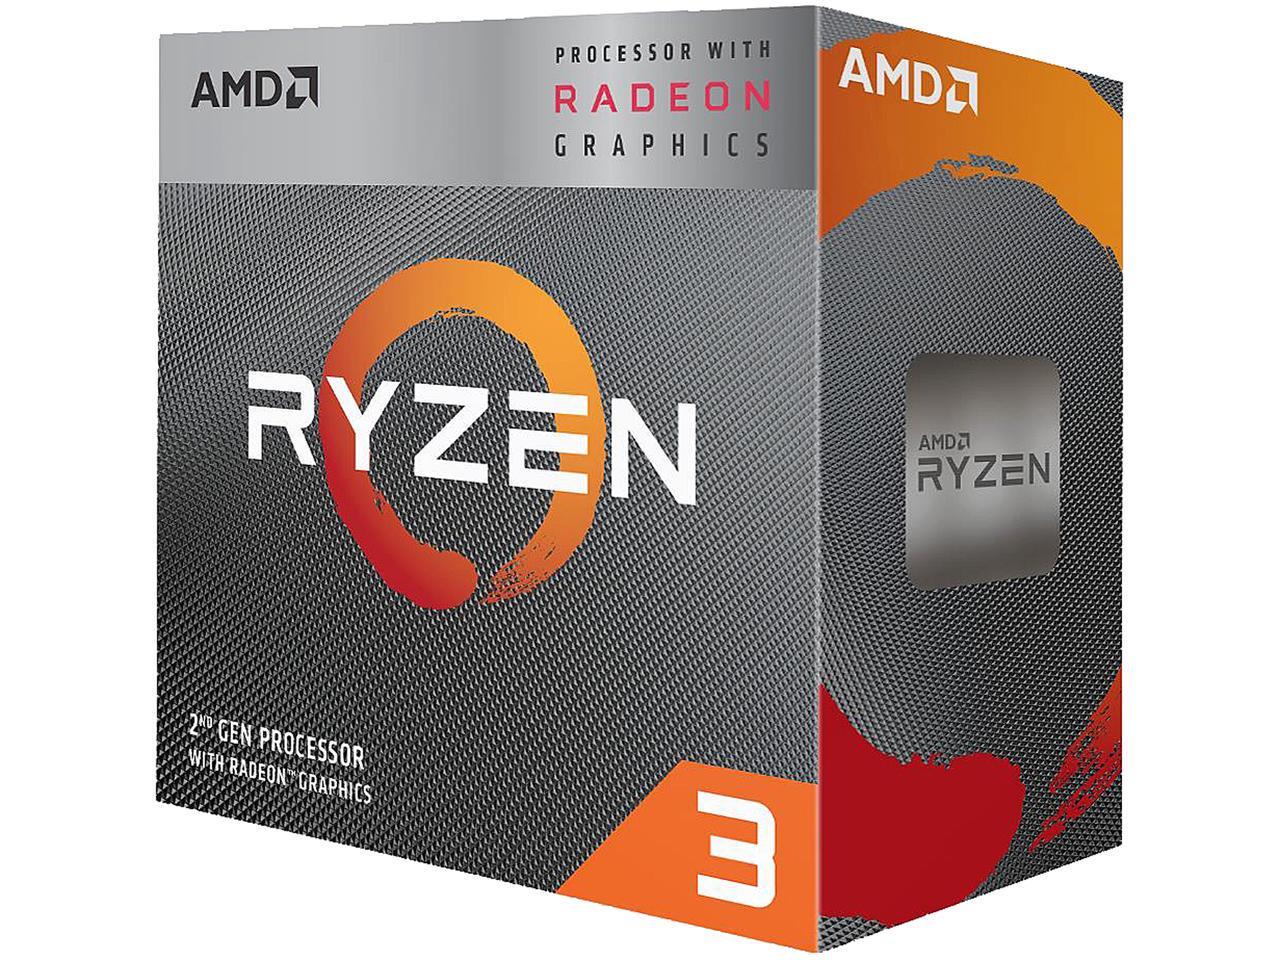 The Best $100 Gaming CPU - Ryzen 3 3200G Review 